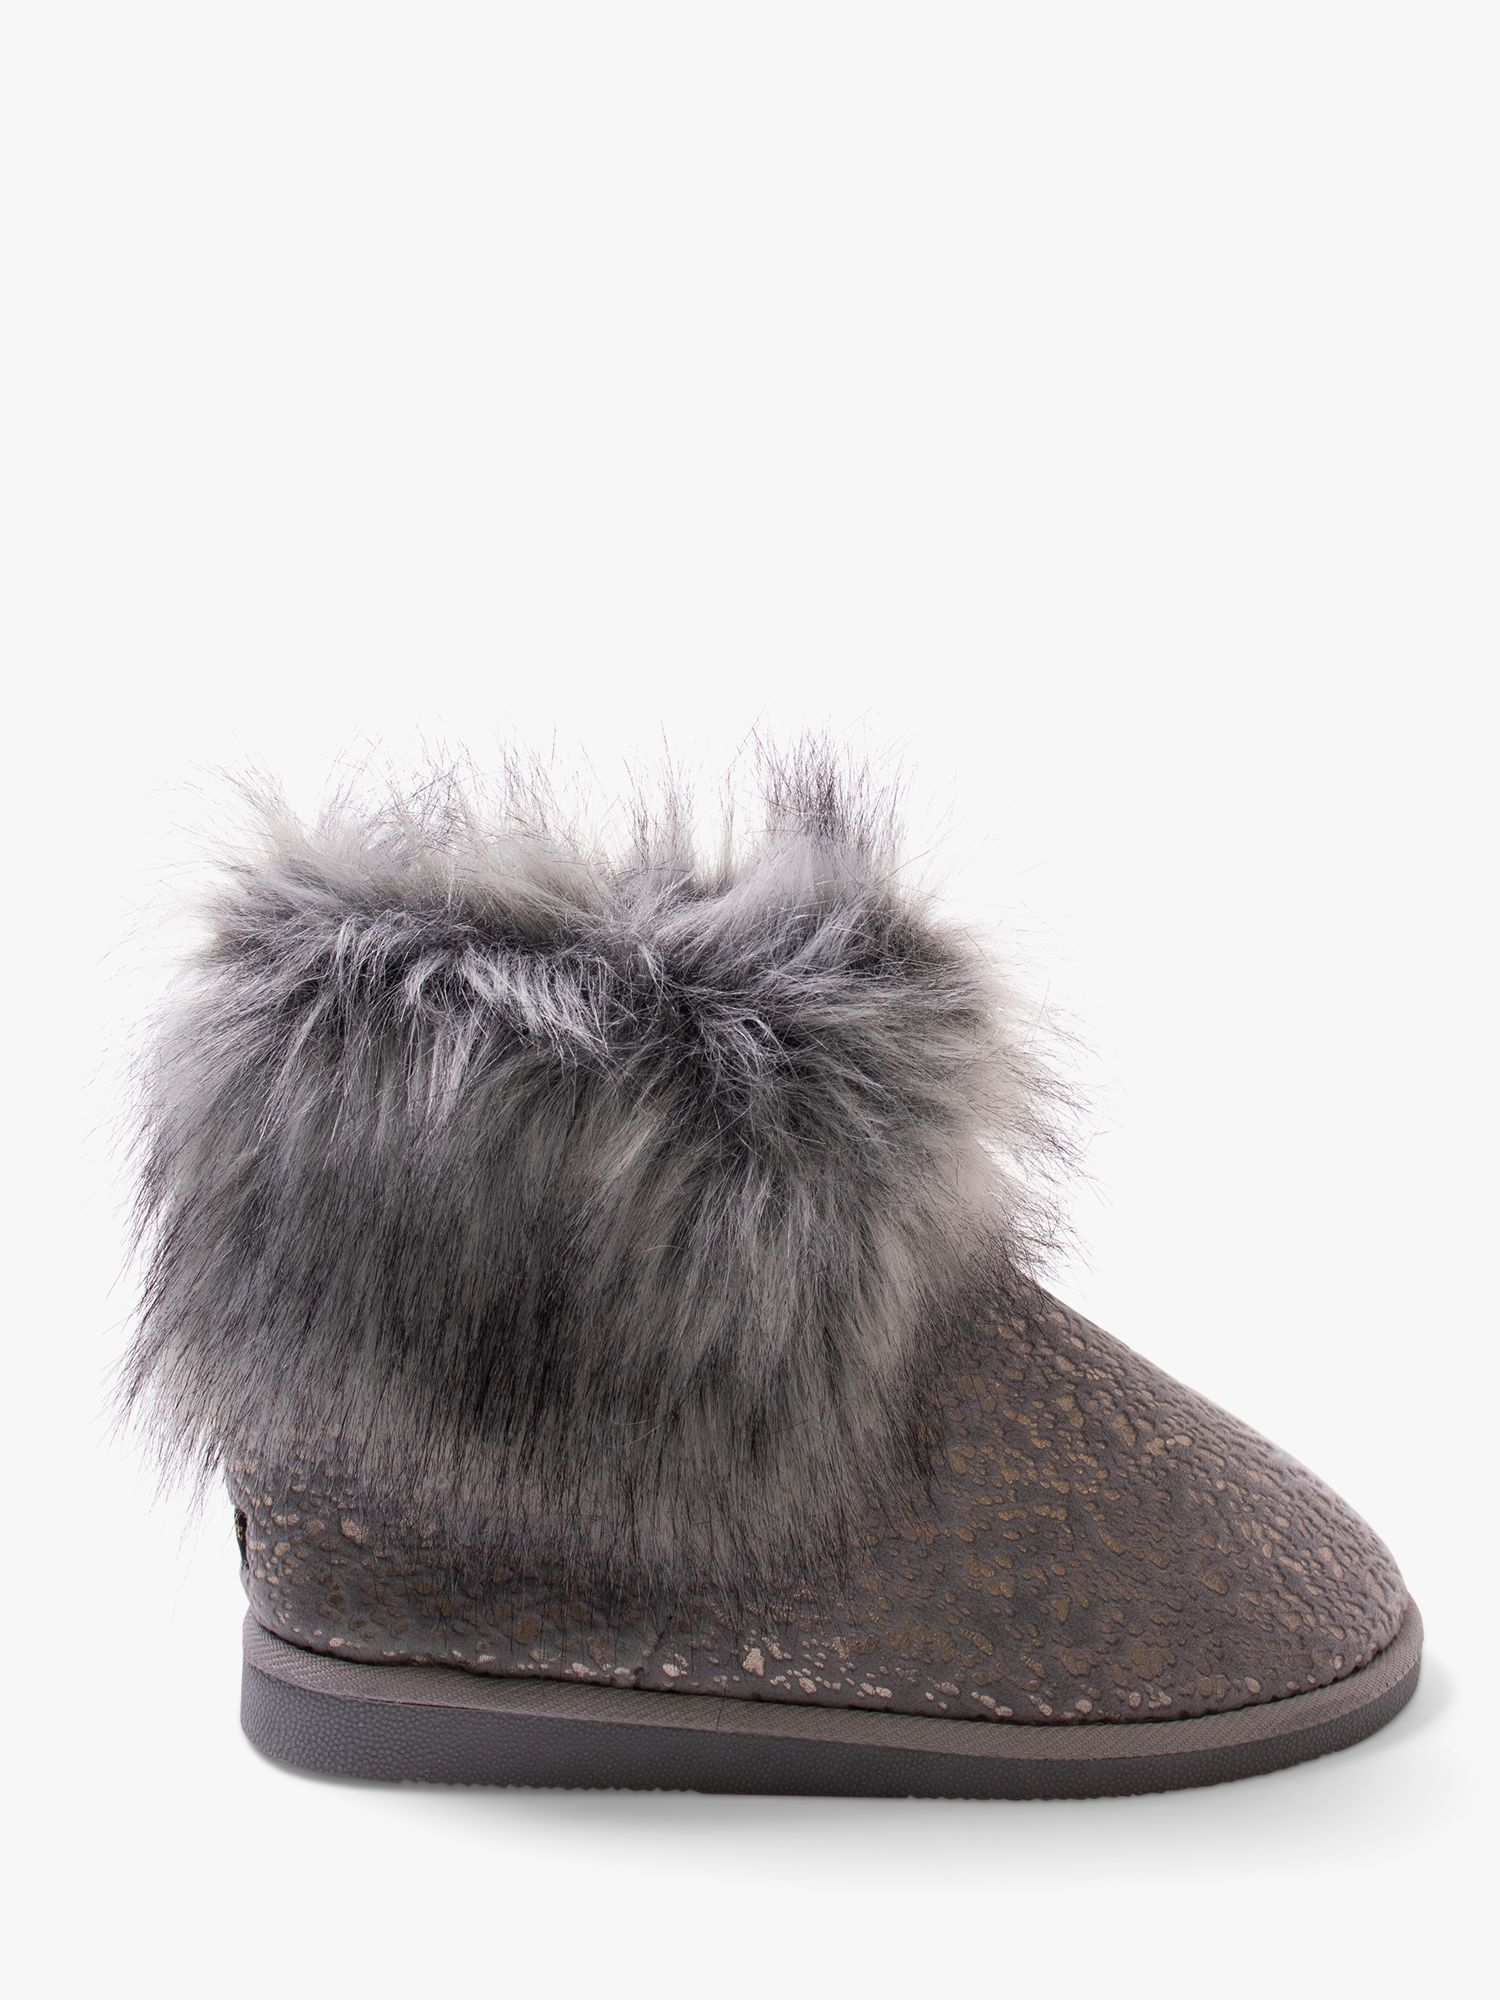 Buy Pretty You London Giselle Ankle Boot Slippers Online at johnlewis.com